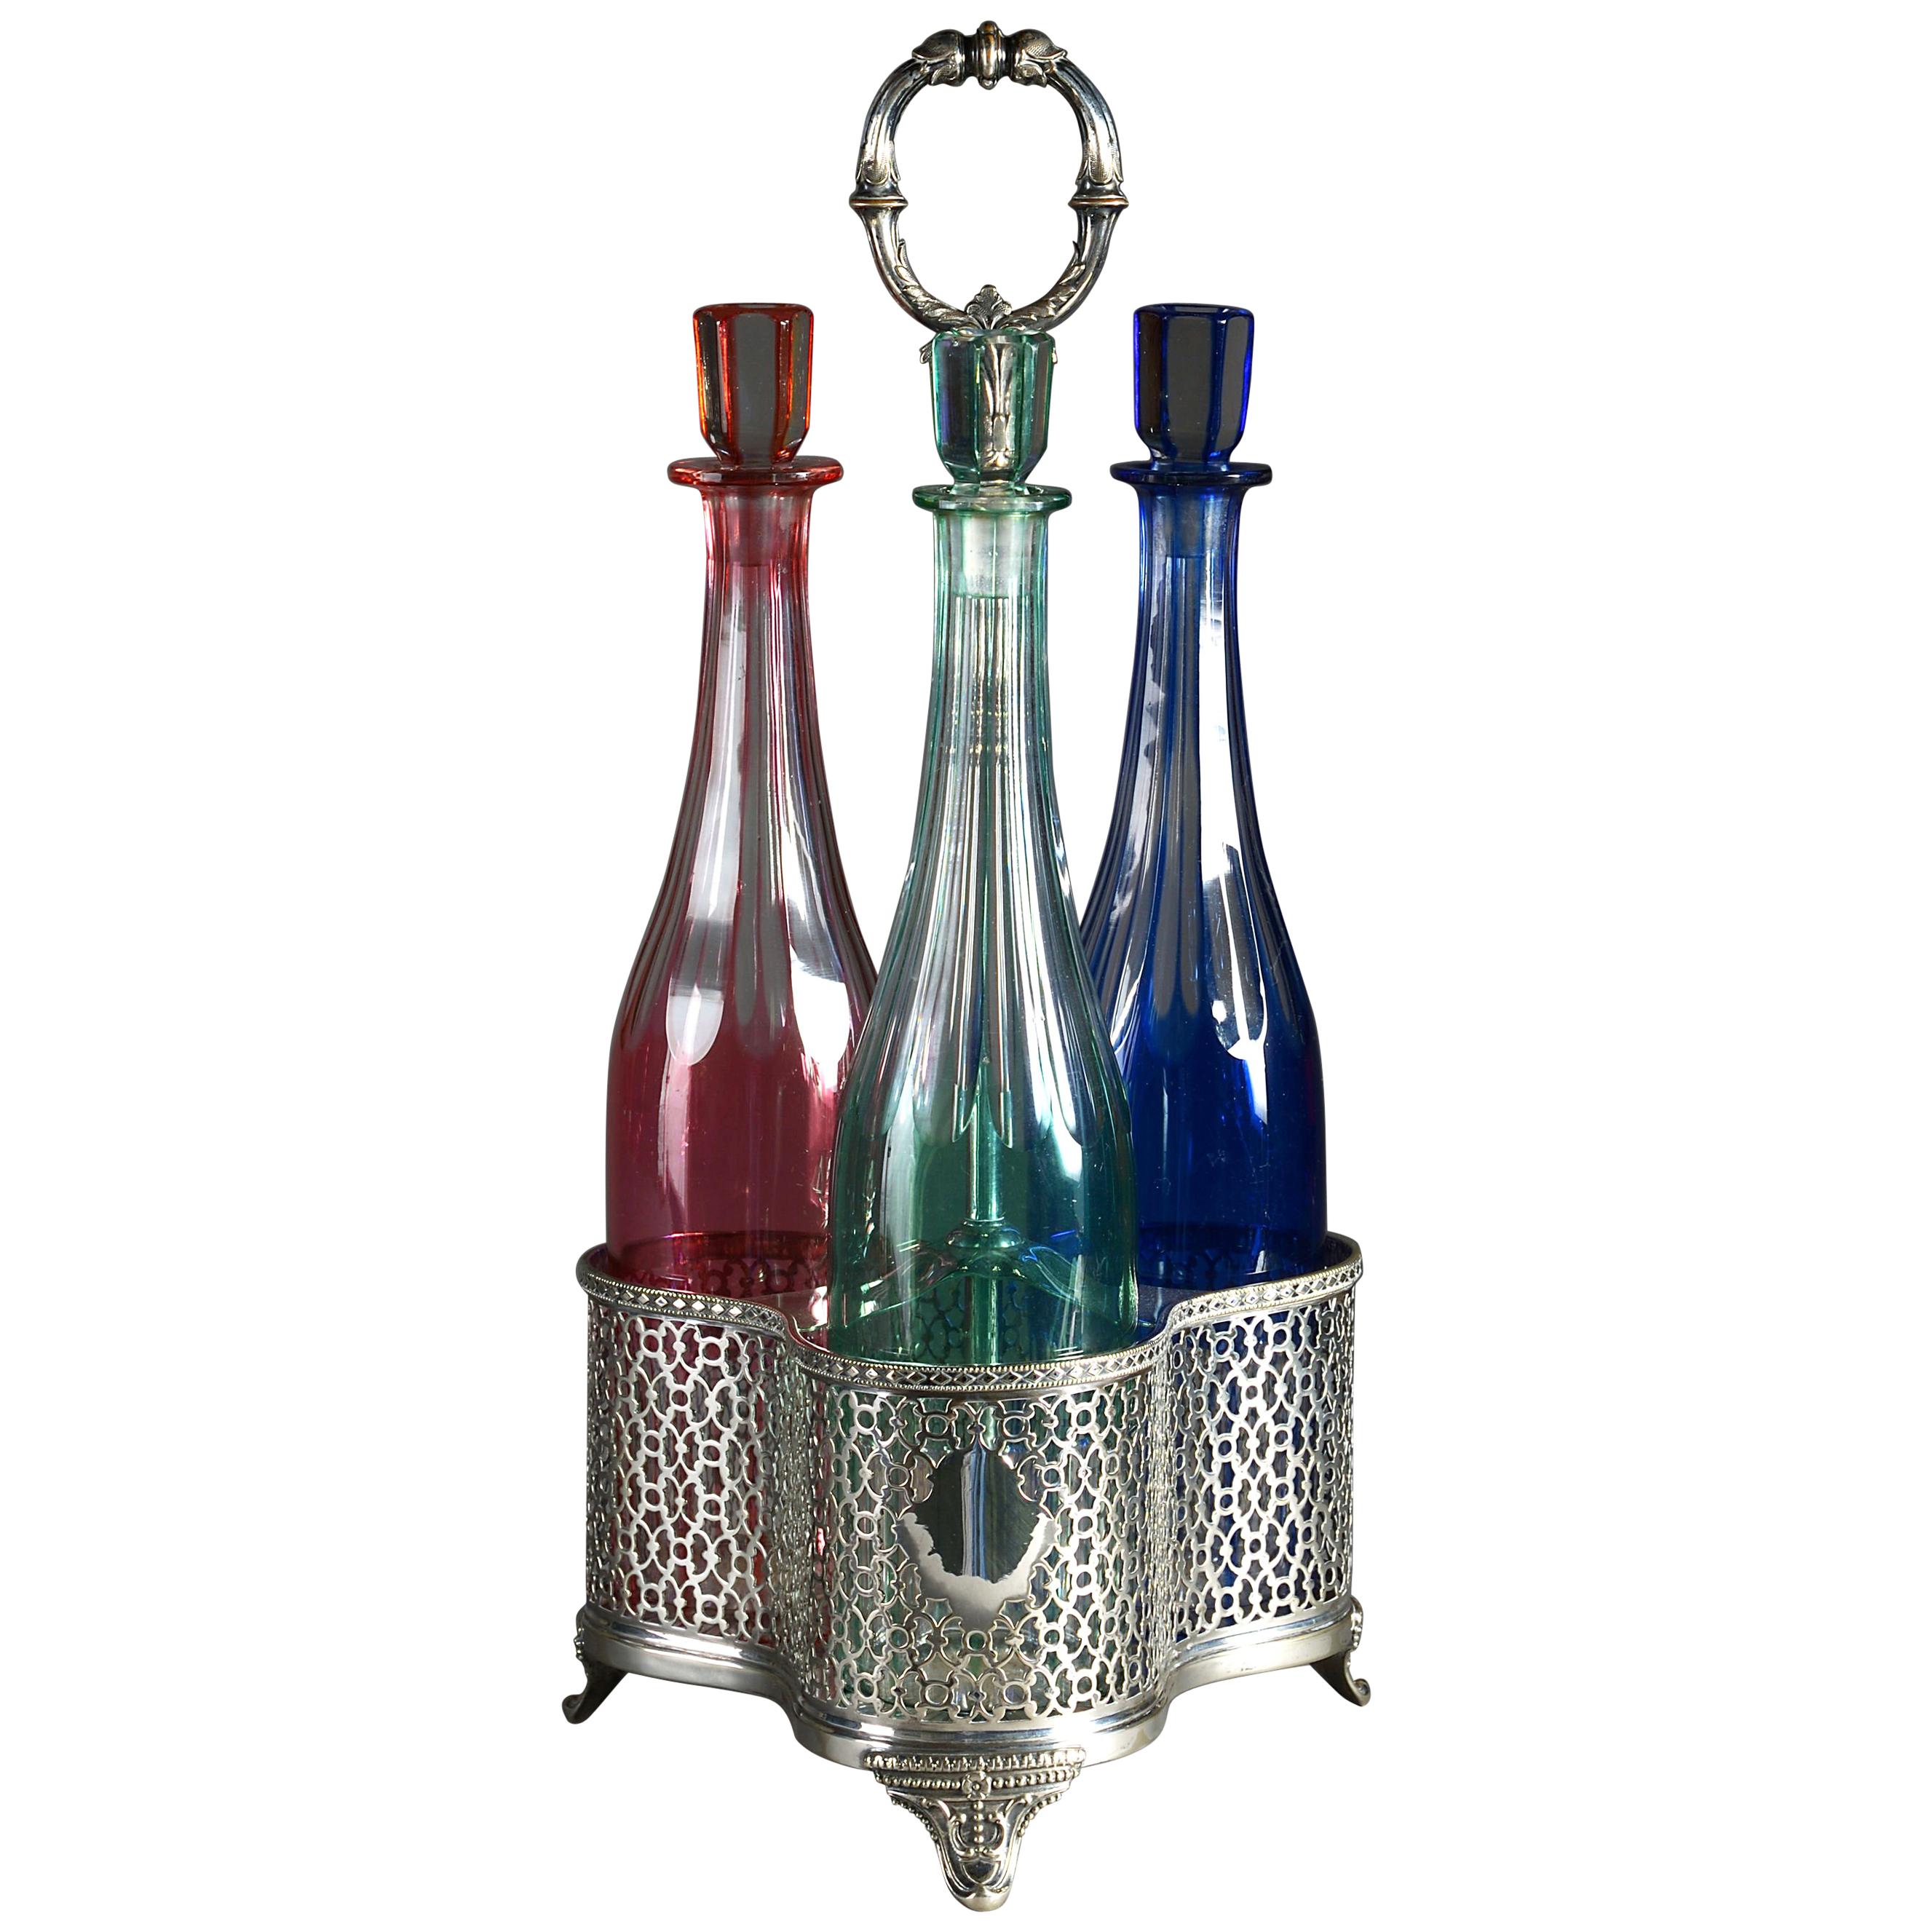  Silvered Bottle Carrier and Three Coloured Glass Cordial Bottles  For Sale